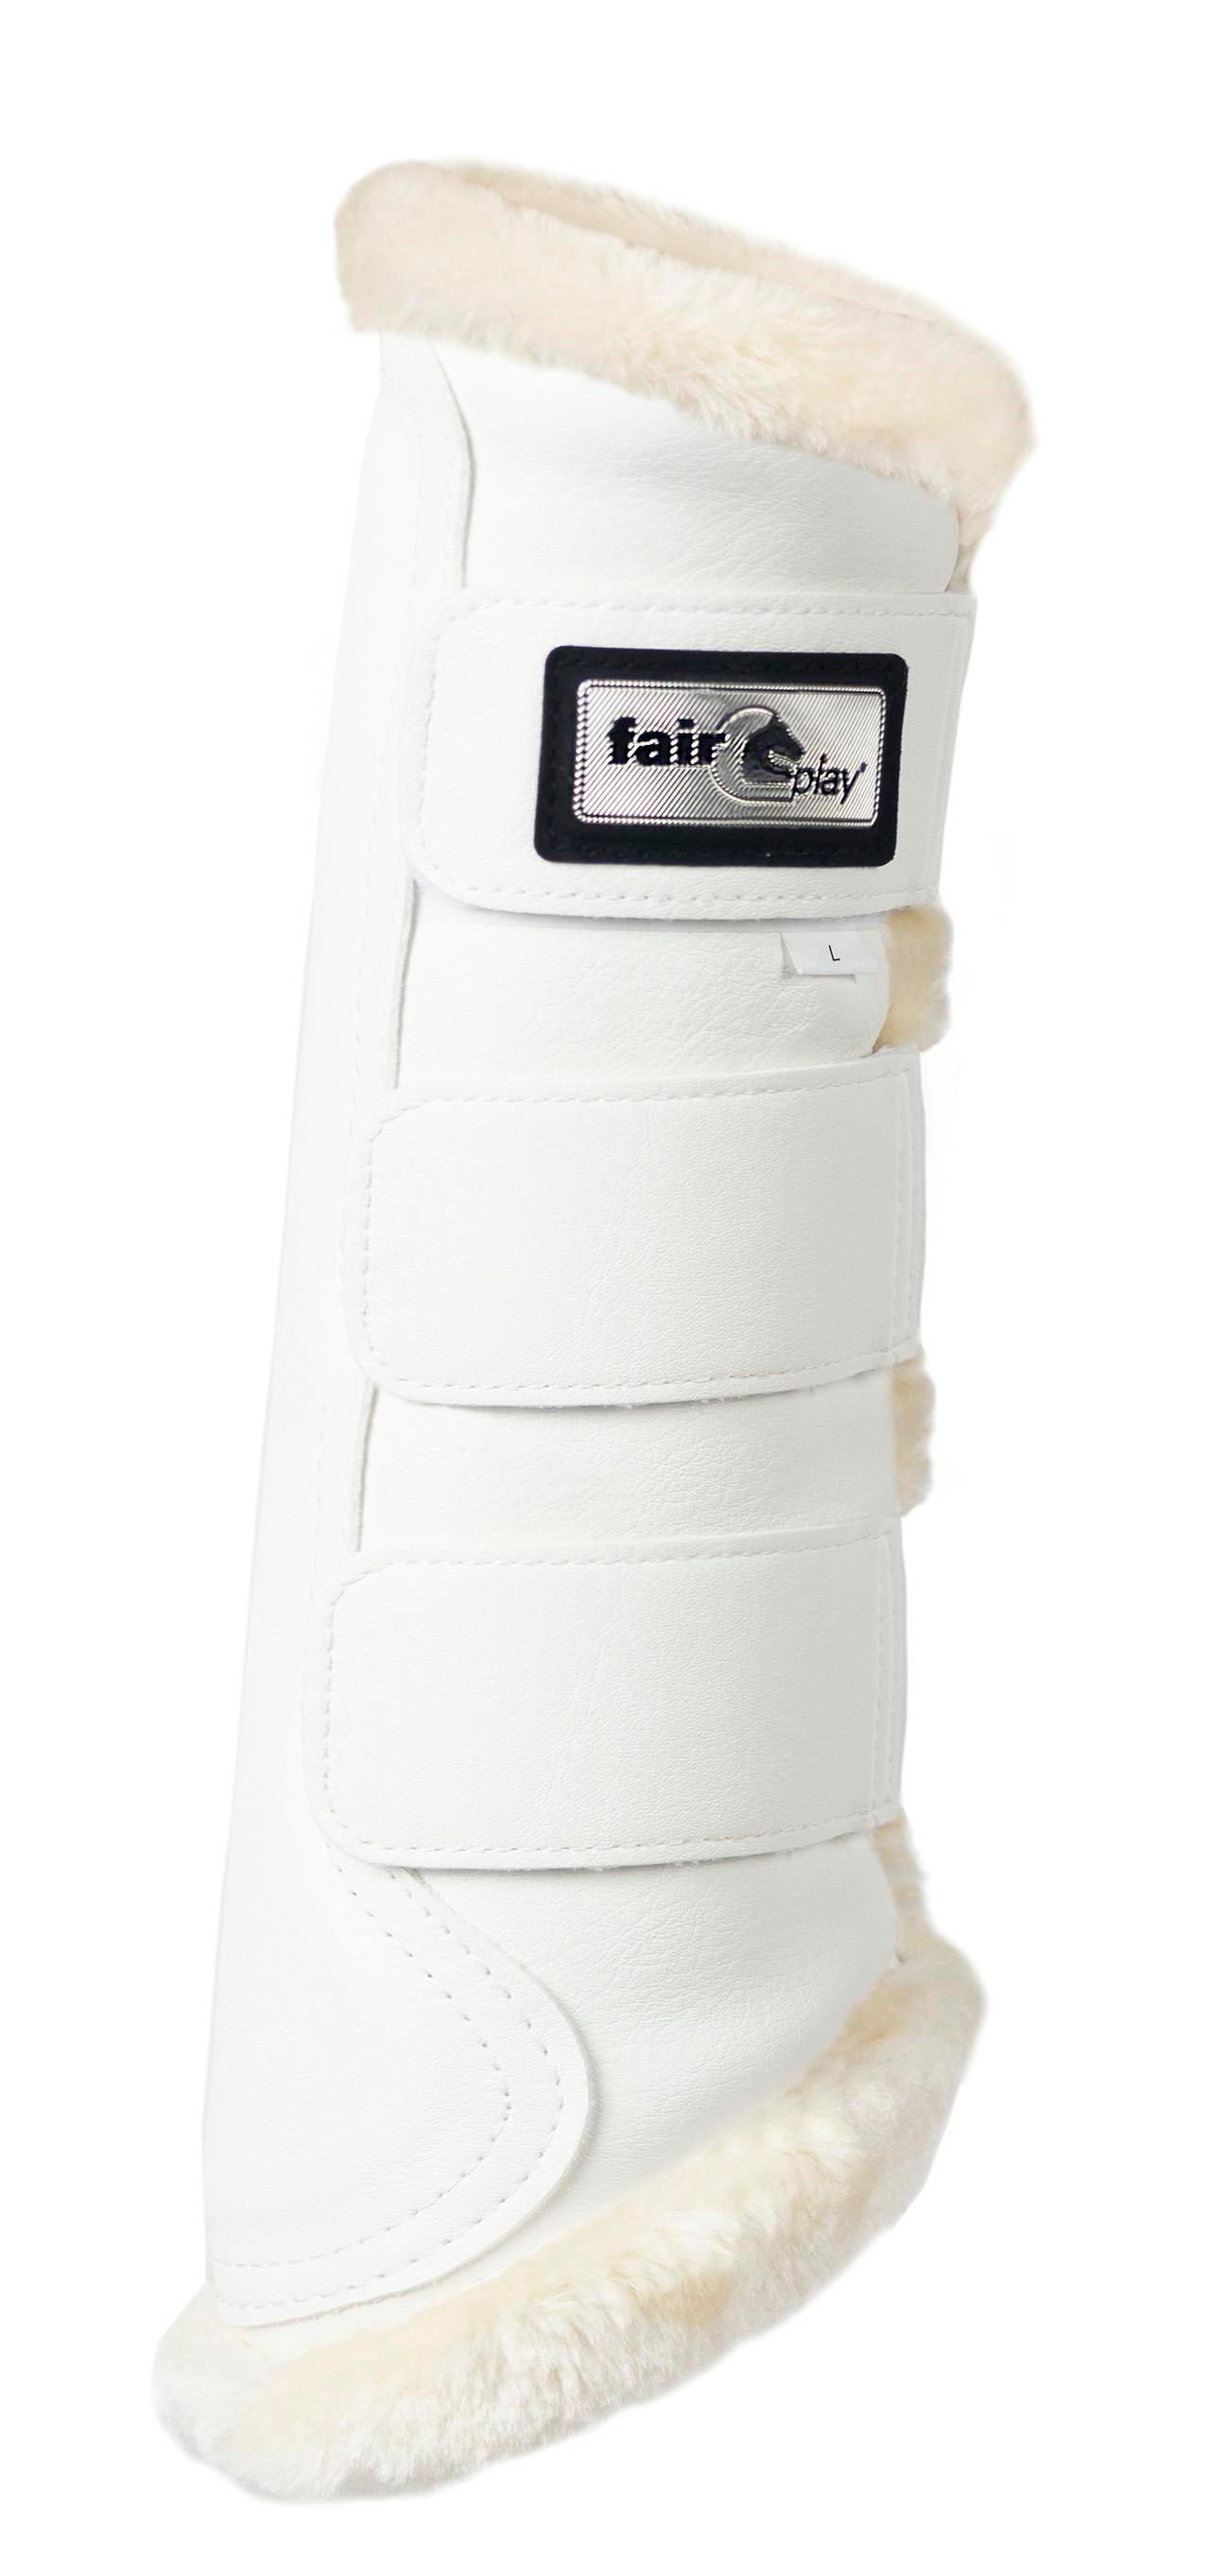 Fairplay dressage protection boots cadence